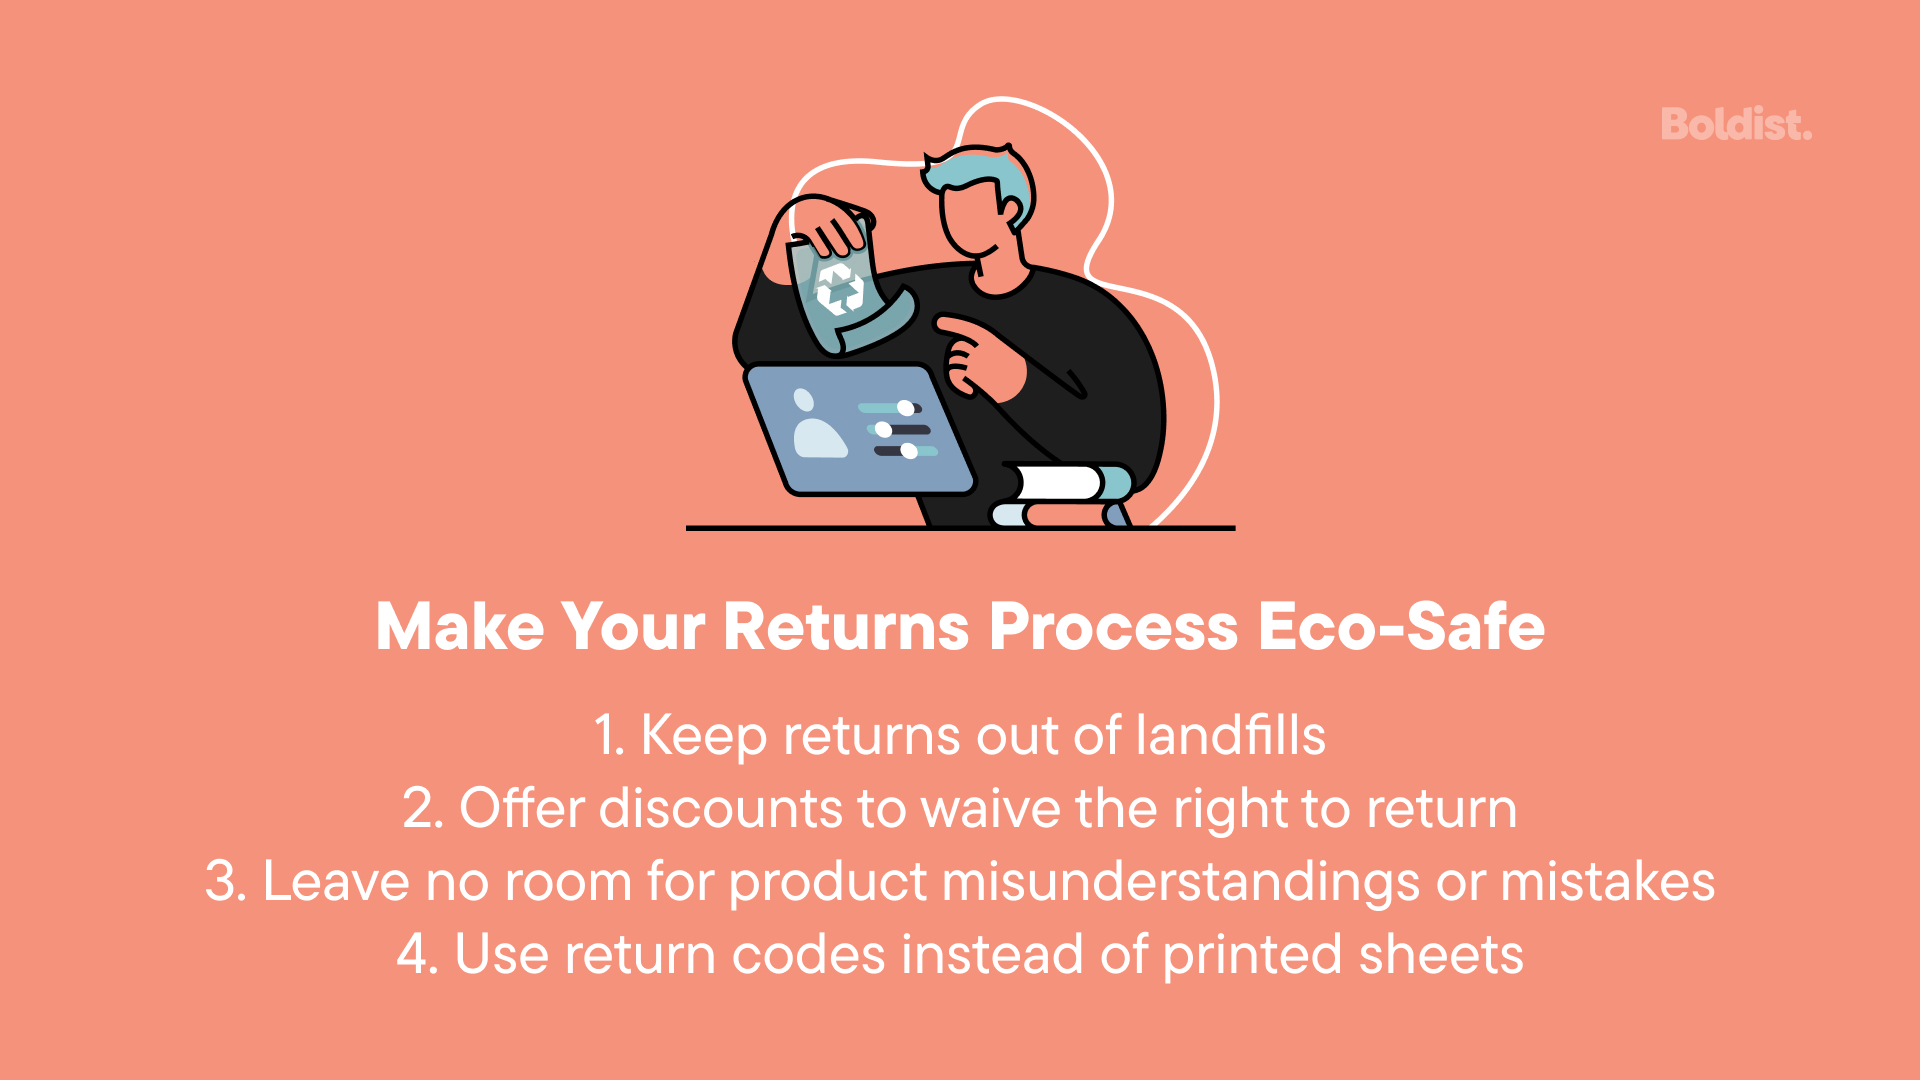 Infographic with tips from the article to make returns eco-friendly. 